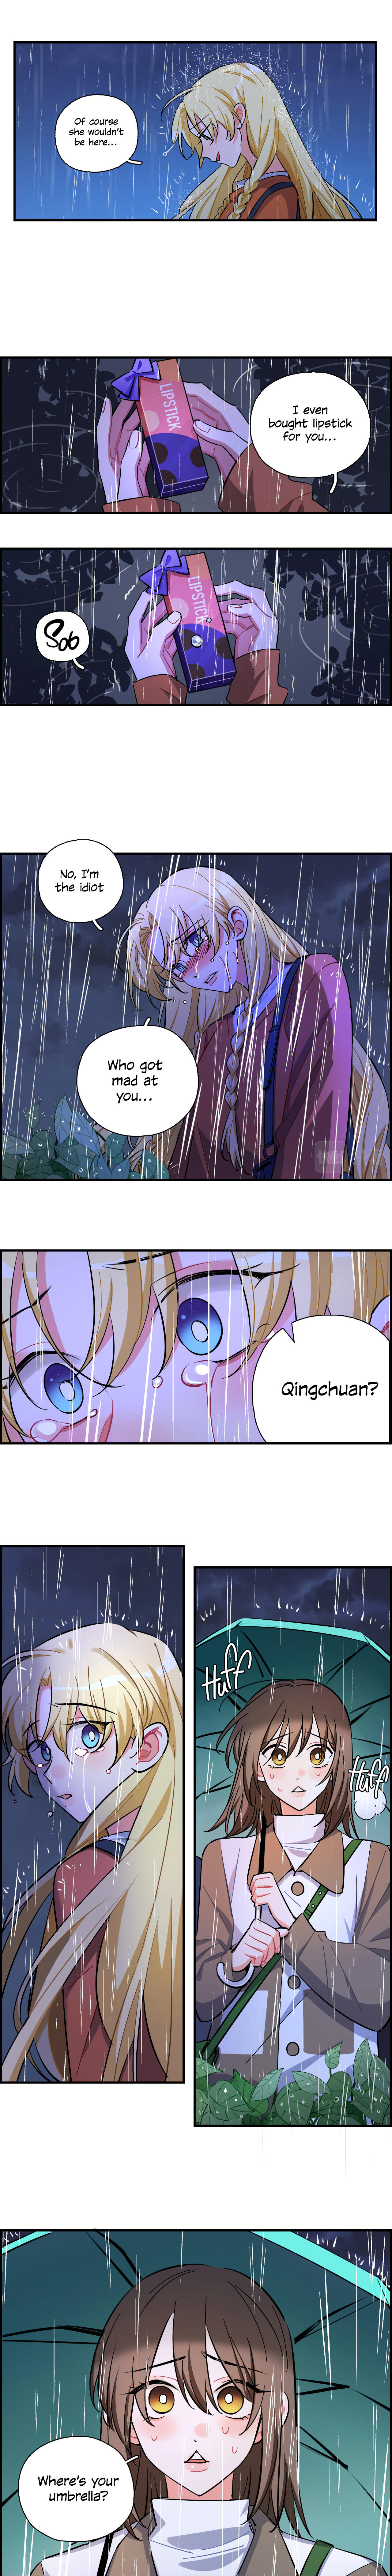 Almost Friends Chapter 39: I Want To See You page 9 - Mangakakalots.com